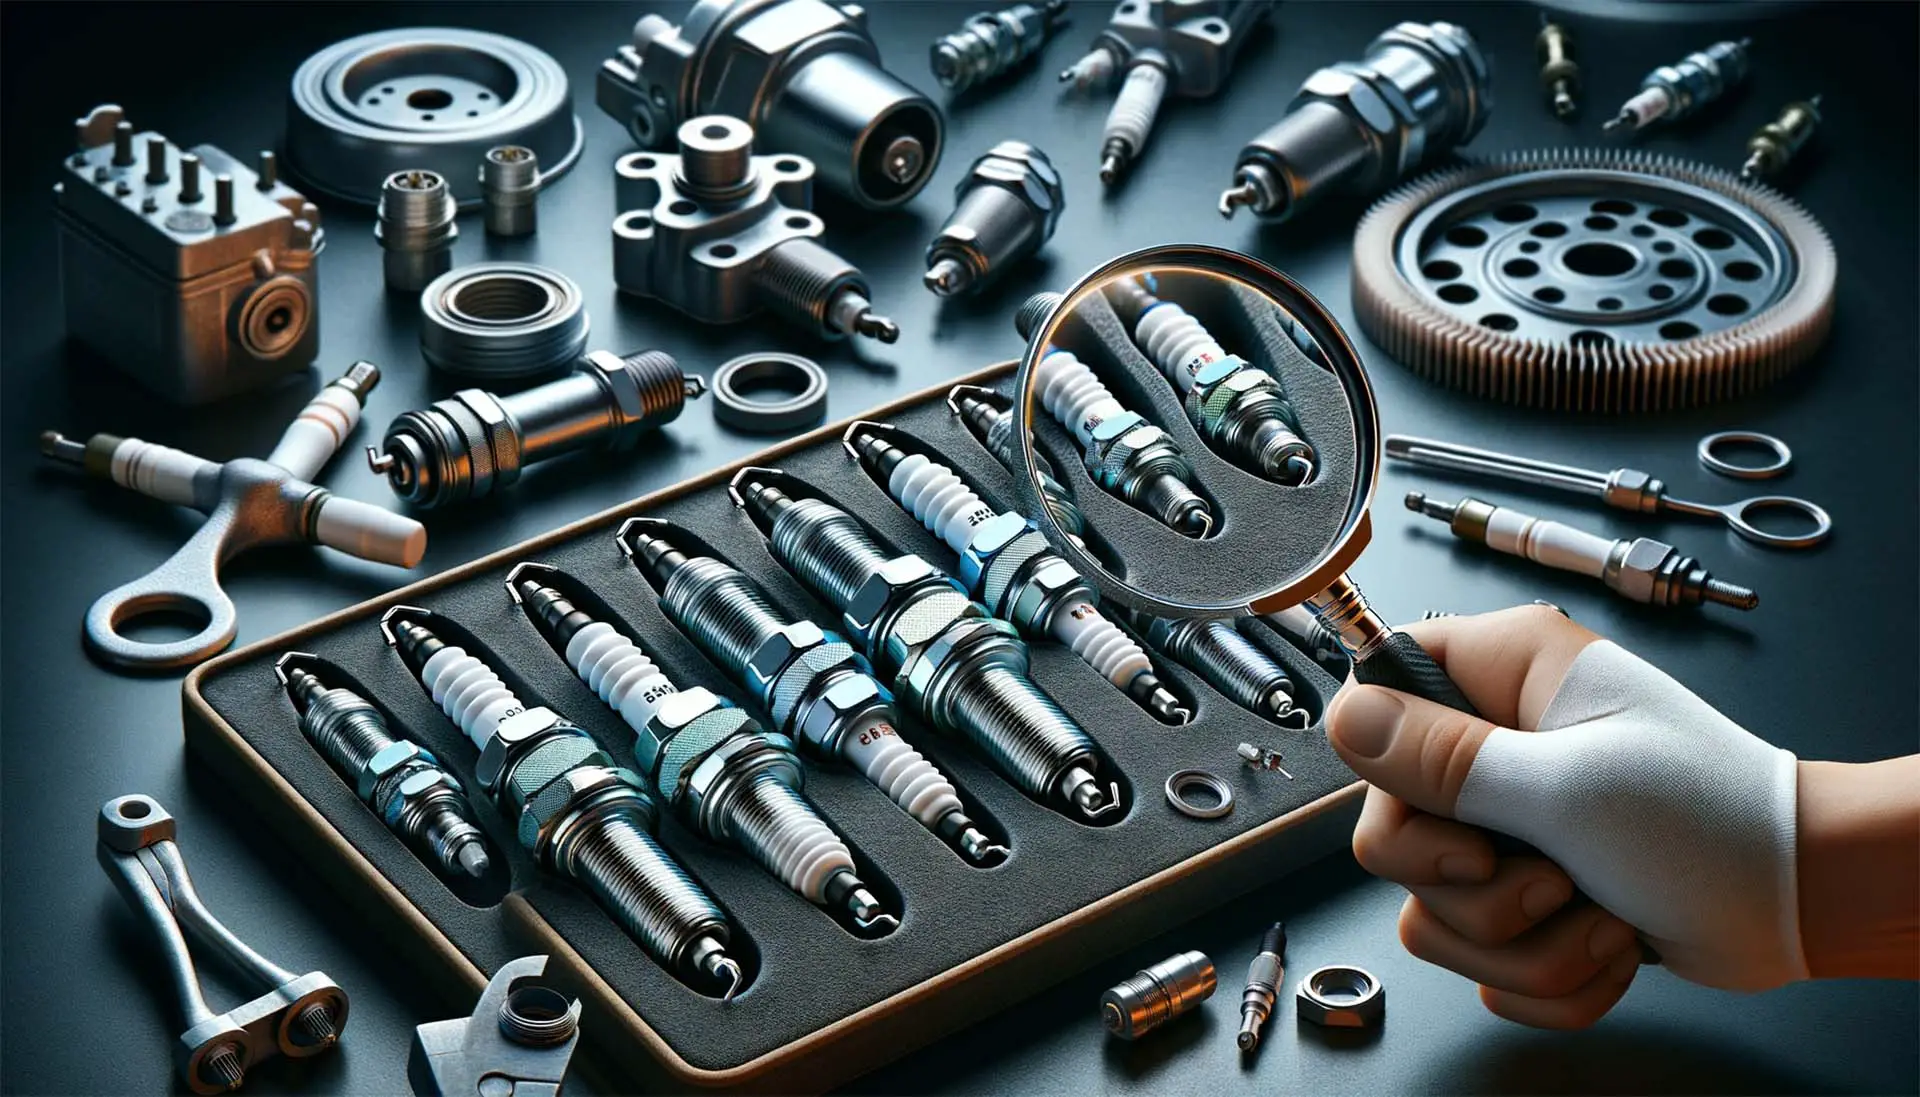 Finding the Best Spark Plug for Your Vehicle